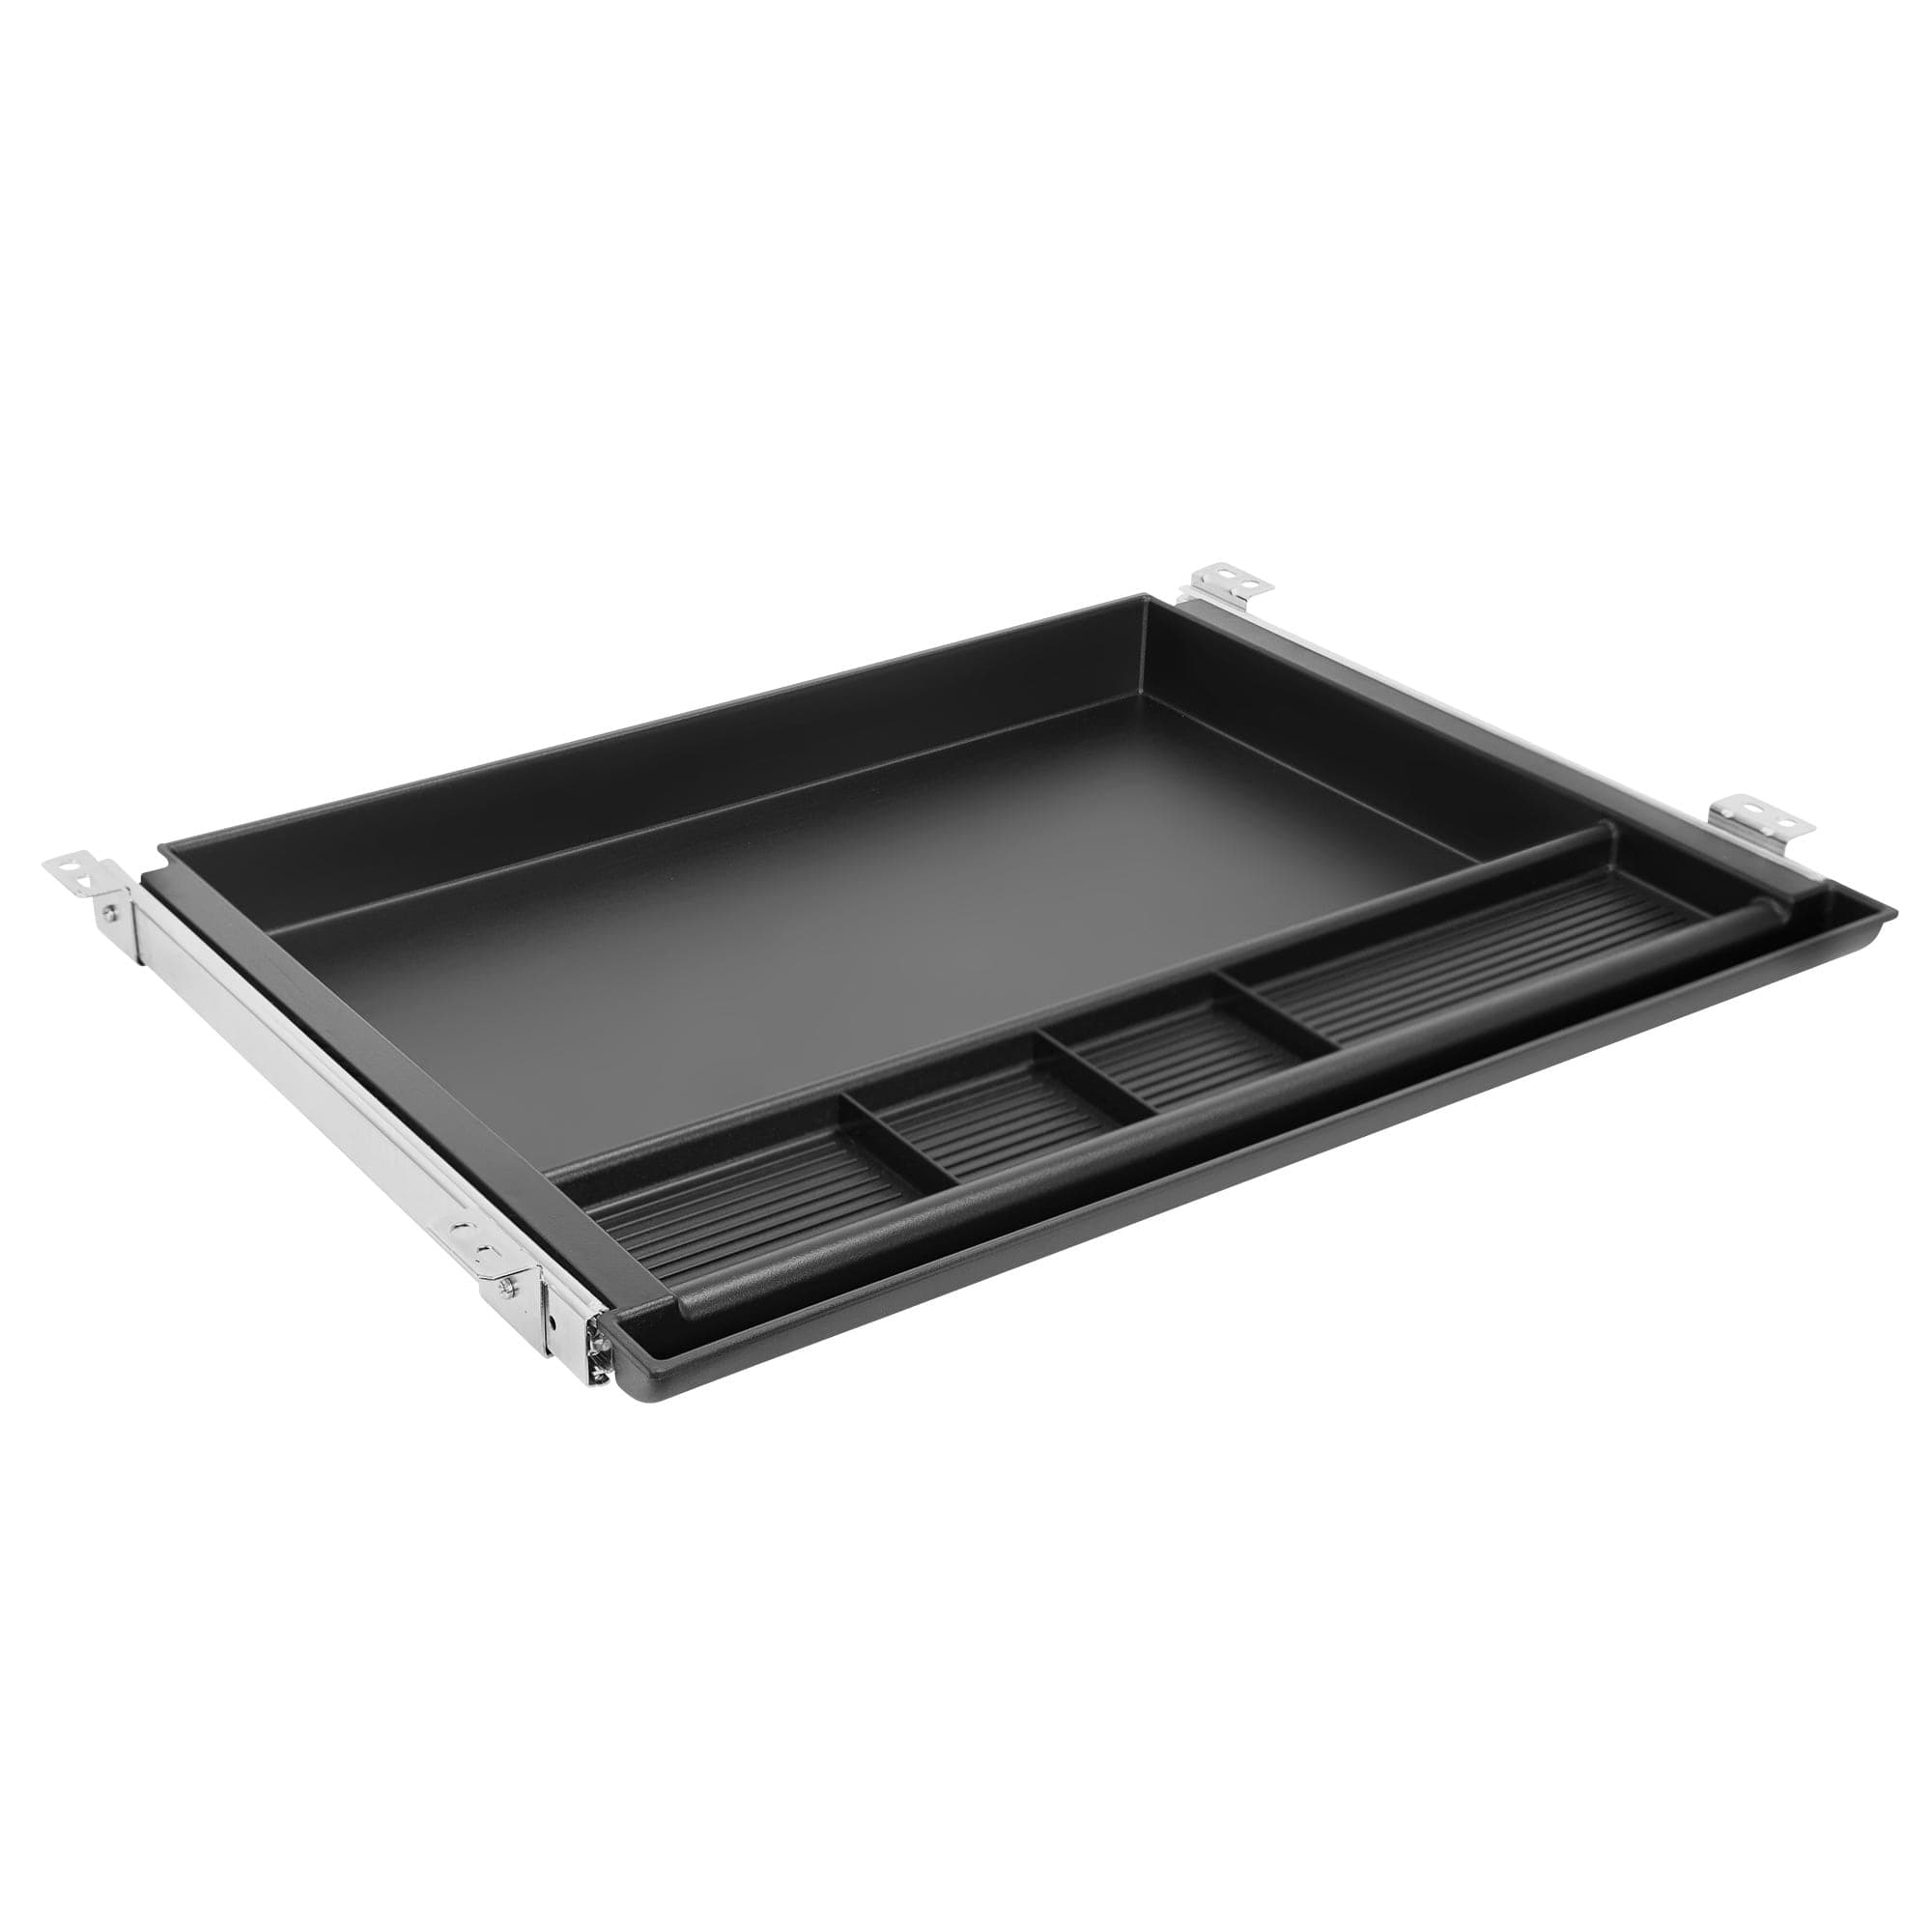  Pencil Drawer by NYCCO Underdesk Drawer 23 Inch Wide -  Ball-Bearing Slides - Black : Office Products